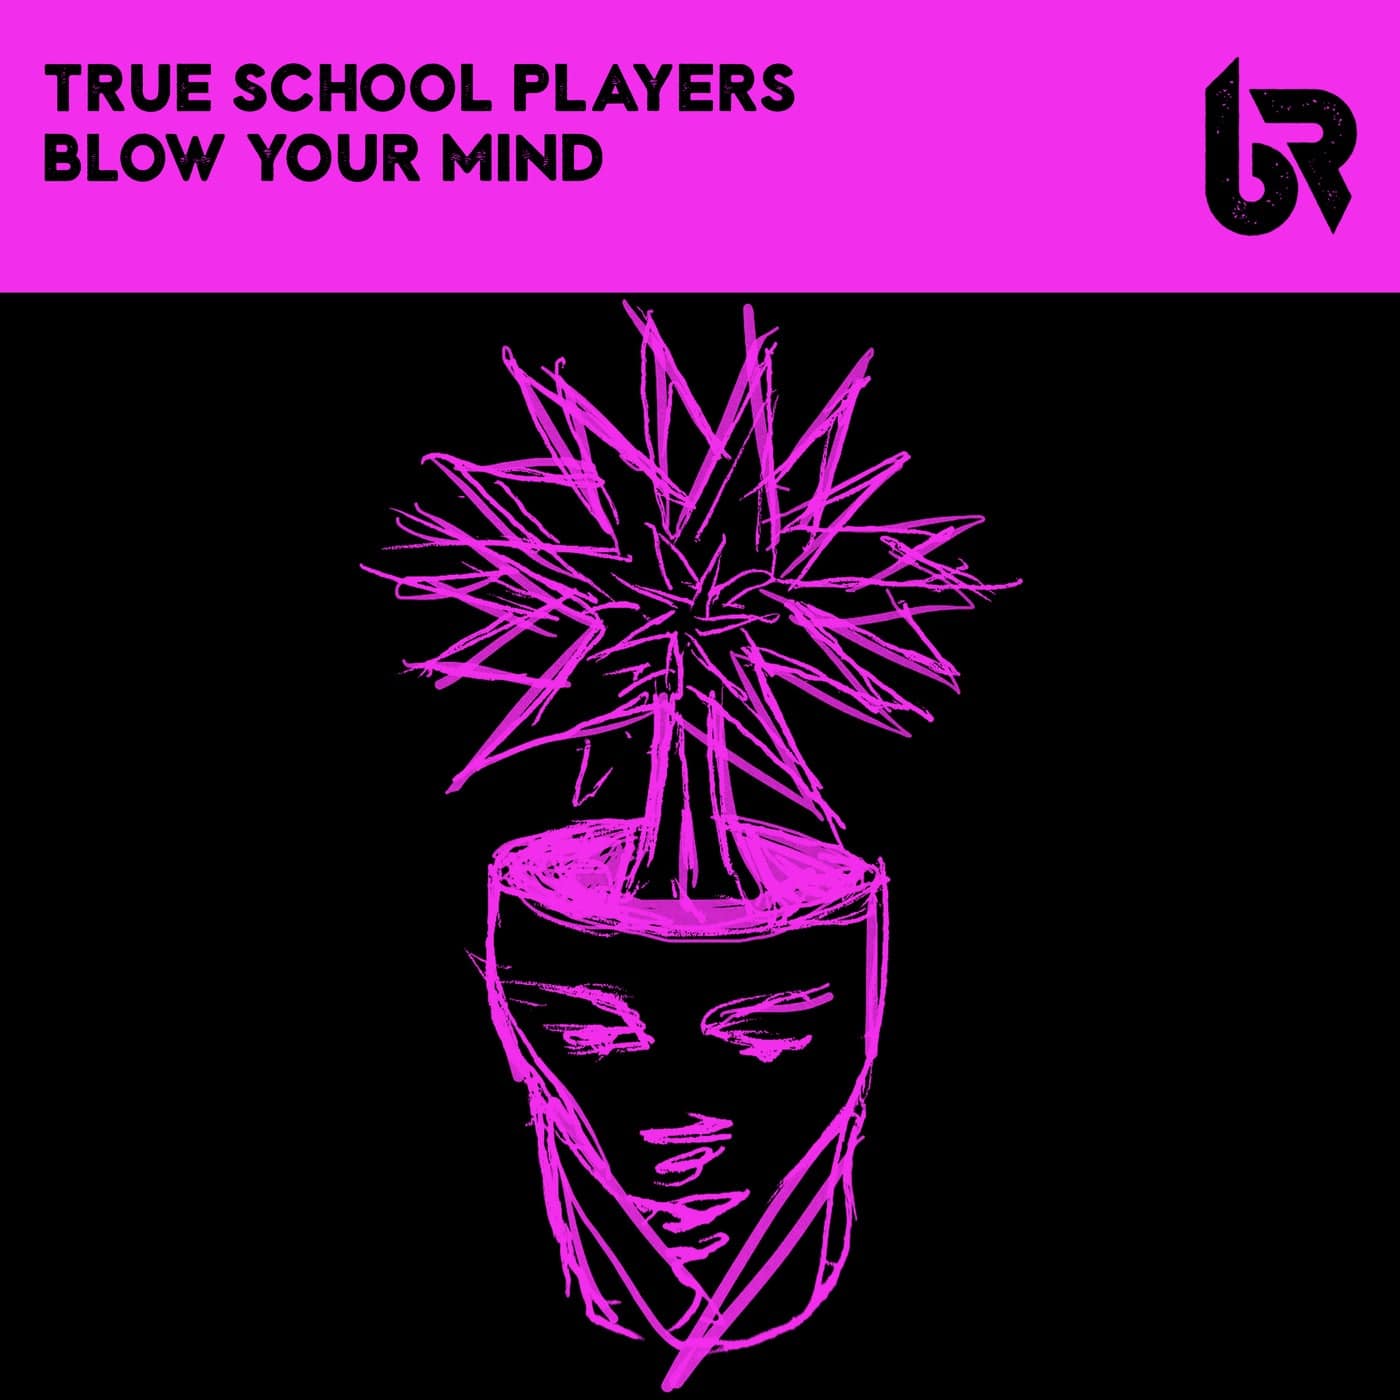 image cover: Blow Your Mind by Joeski, Harry Romero, True School Players on Bambossa Records